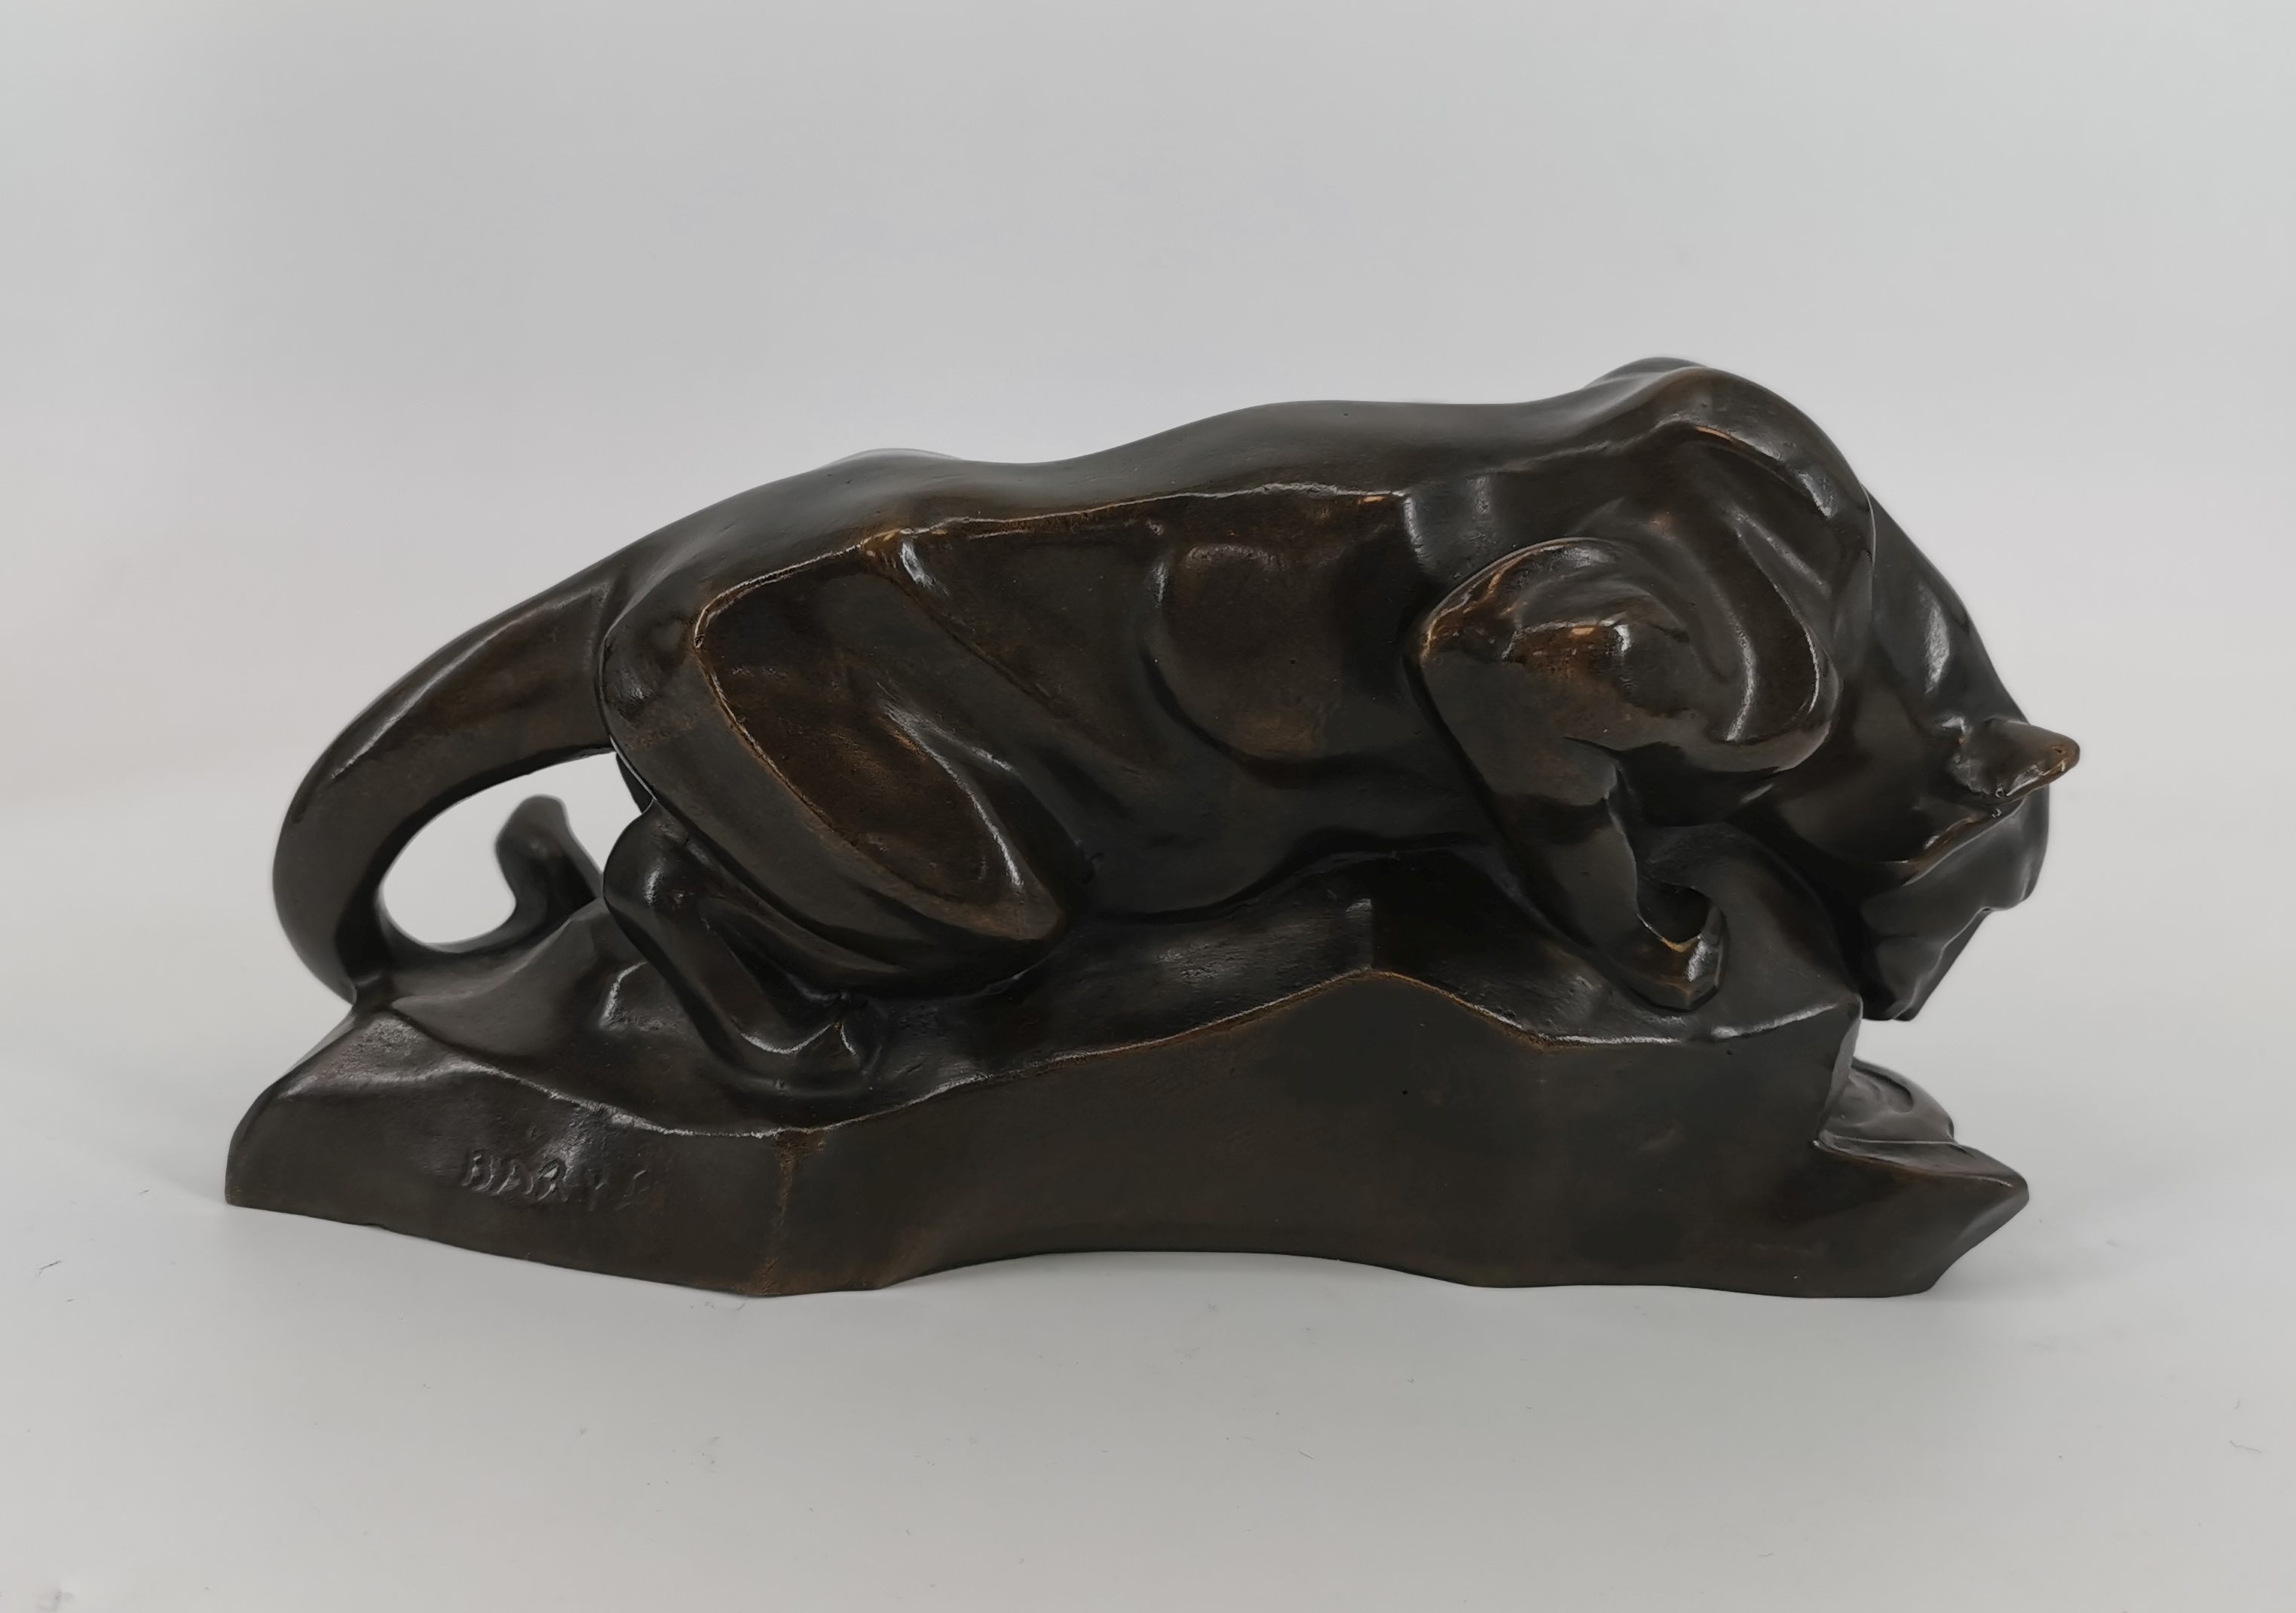 BAYRE - SCULPTURE "PANTHER" - Image 3 of 6